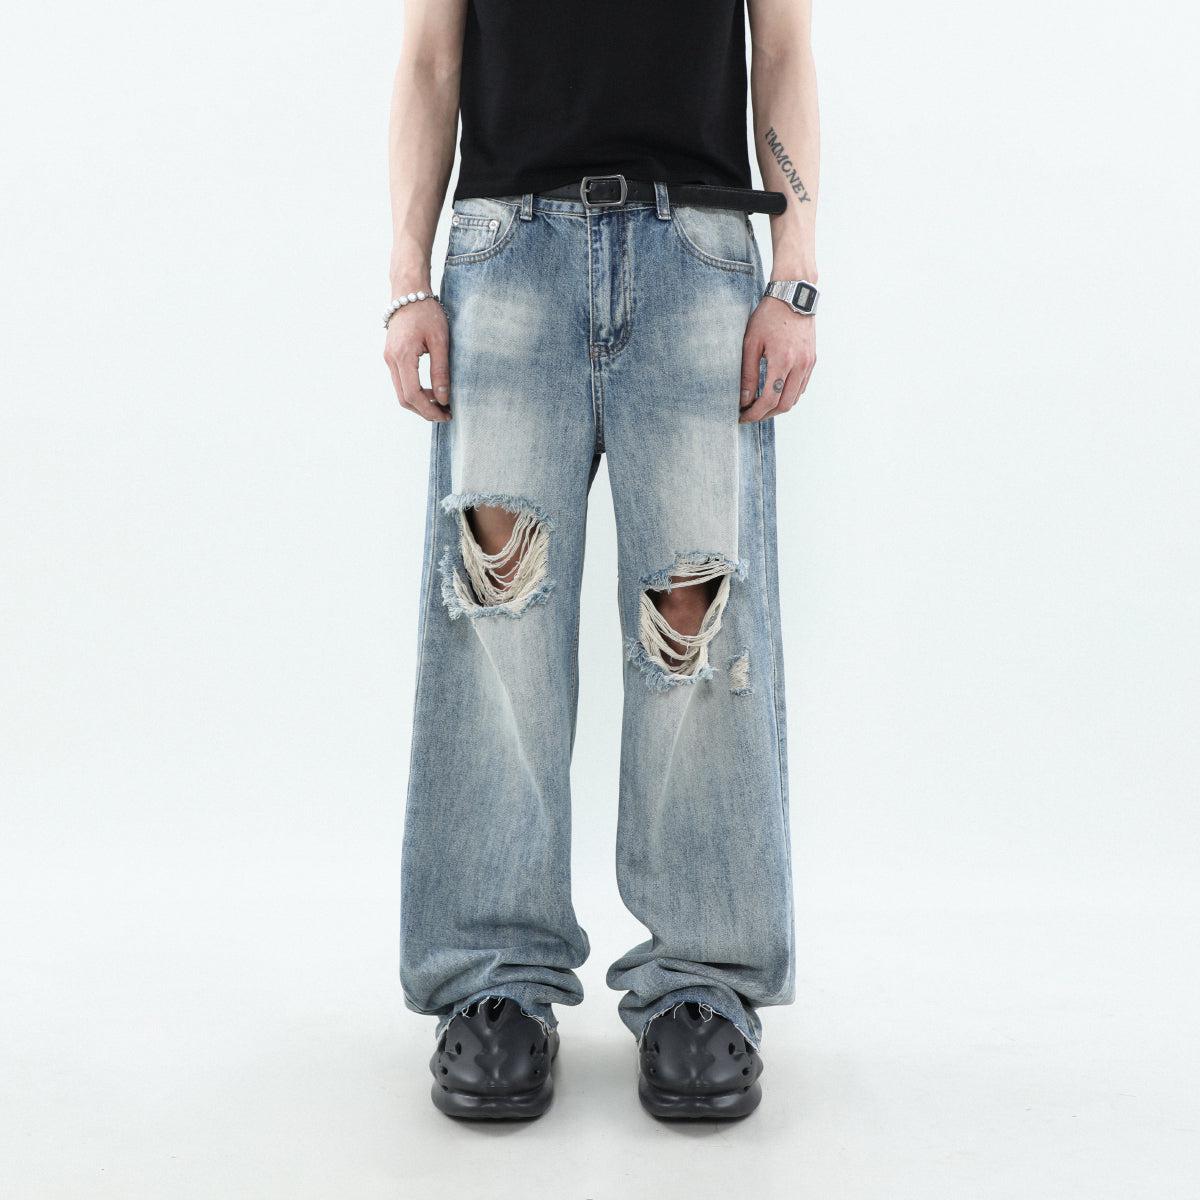 Washed Ripped Hole Jeans Korean Street Fashion Jeans By Mr Nearly Shop Online at OH Vault